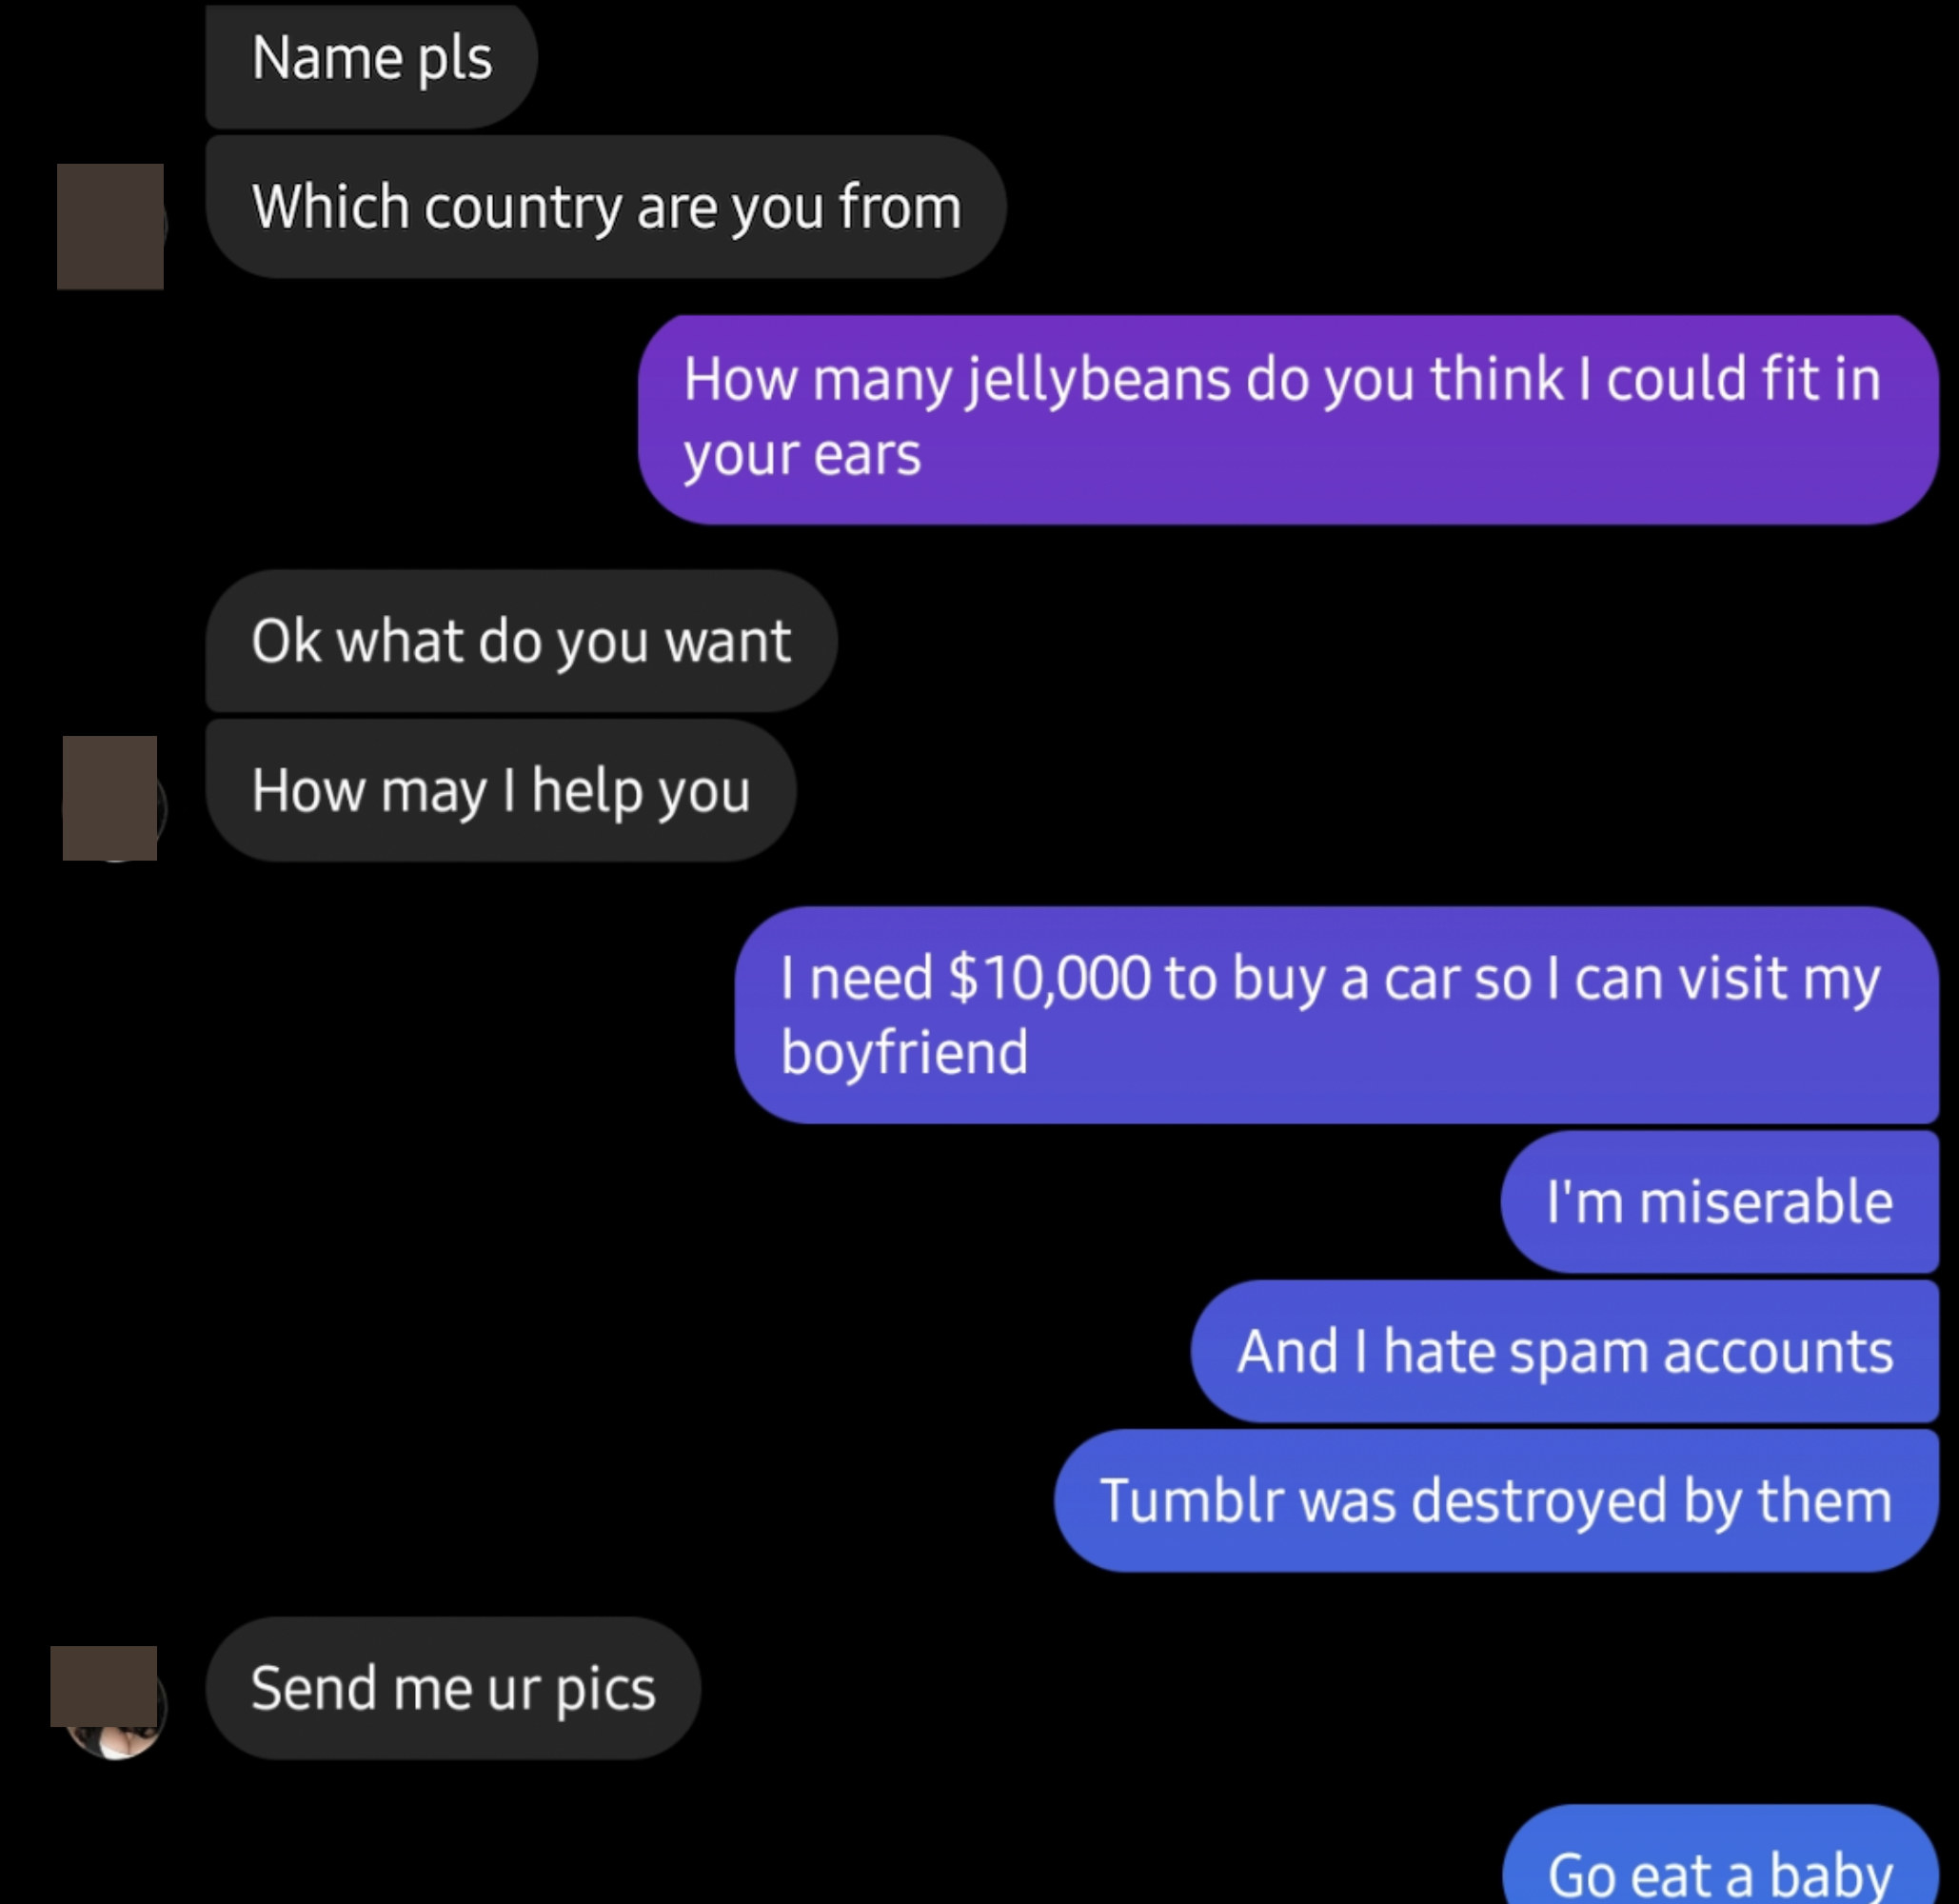 person asks a scammer how many jellybeans do you think they can fit in their ear